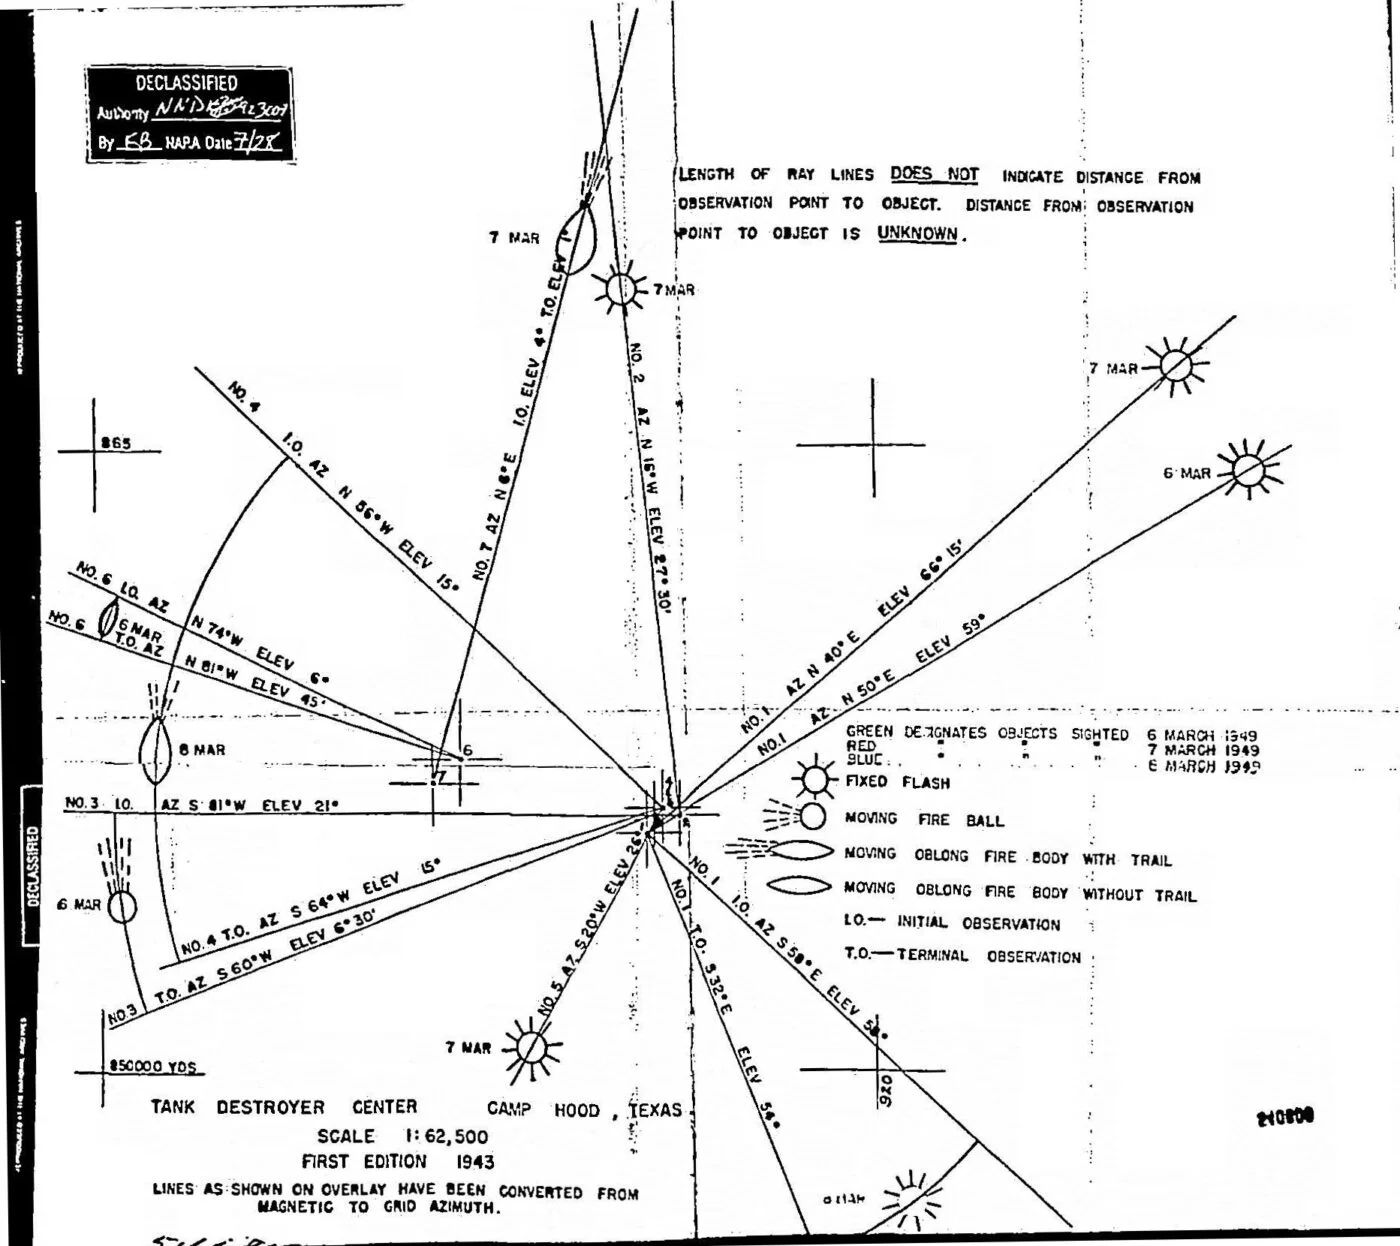 Army UAP Tracking Network Record AARO Missed Finding in the Blue Book Files, March 6-8, 1949 (Site B Nuclear Weapons    Stockpile, Killeen Base, Camp Hood, Texas). Later cases included triangulations of speed, size, and altitude data on    UAP.